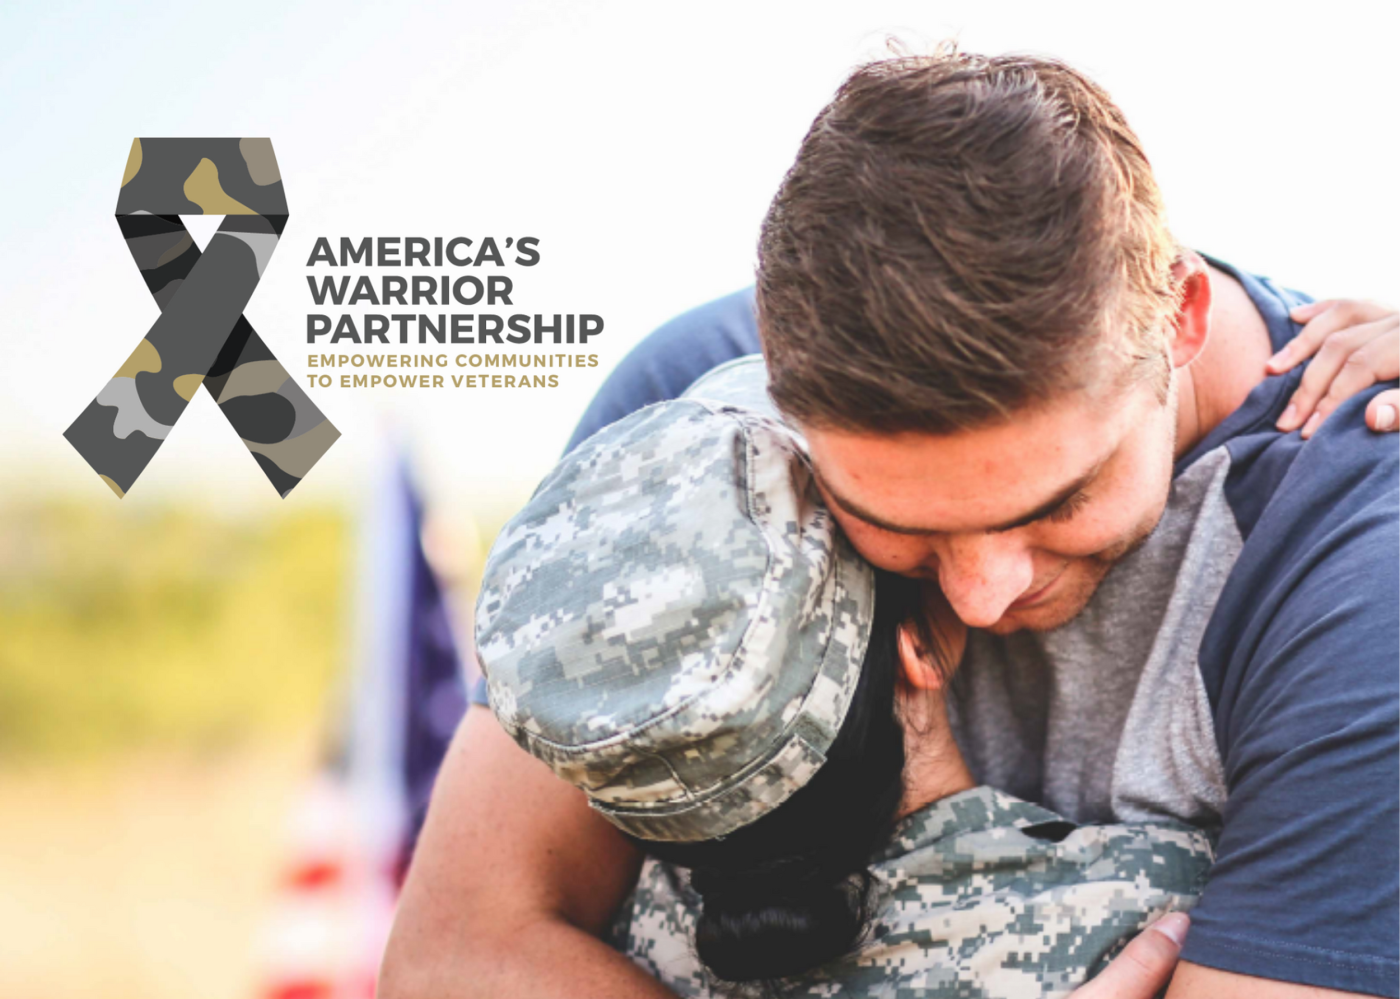 America’s Warrior Partnership (AWP) is dedicated to provide support so  Veterans understand where and how they can access resources locally.